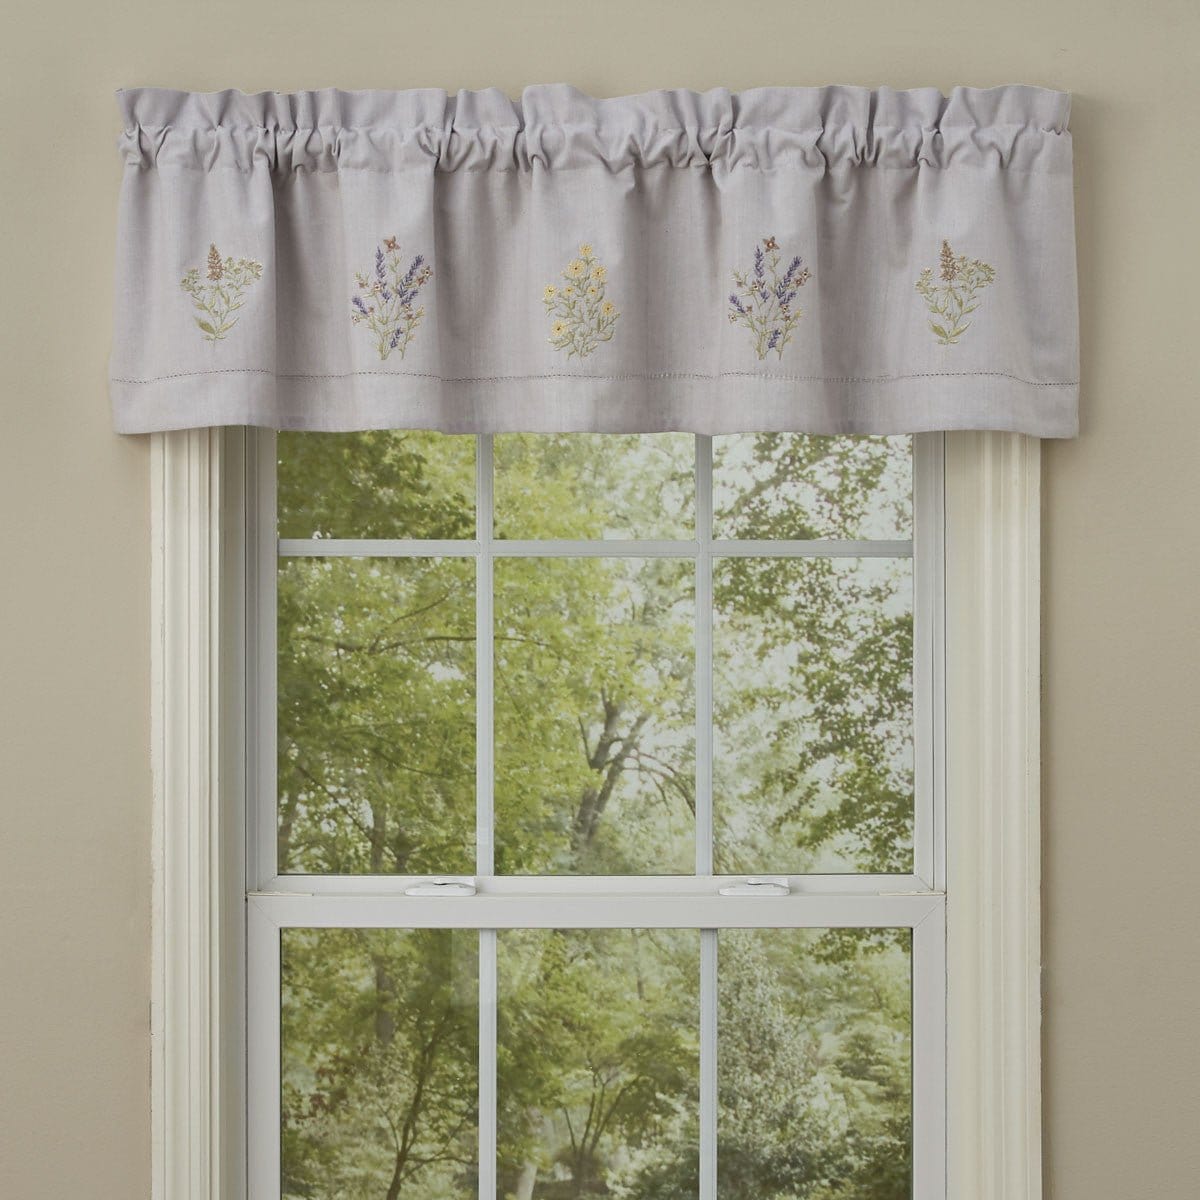 Embroidered flowers Valance 14" High Lined-Park Designs-The Village Merchant